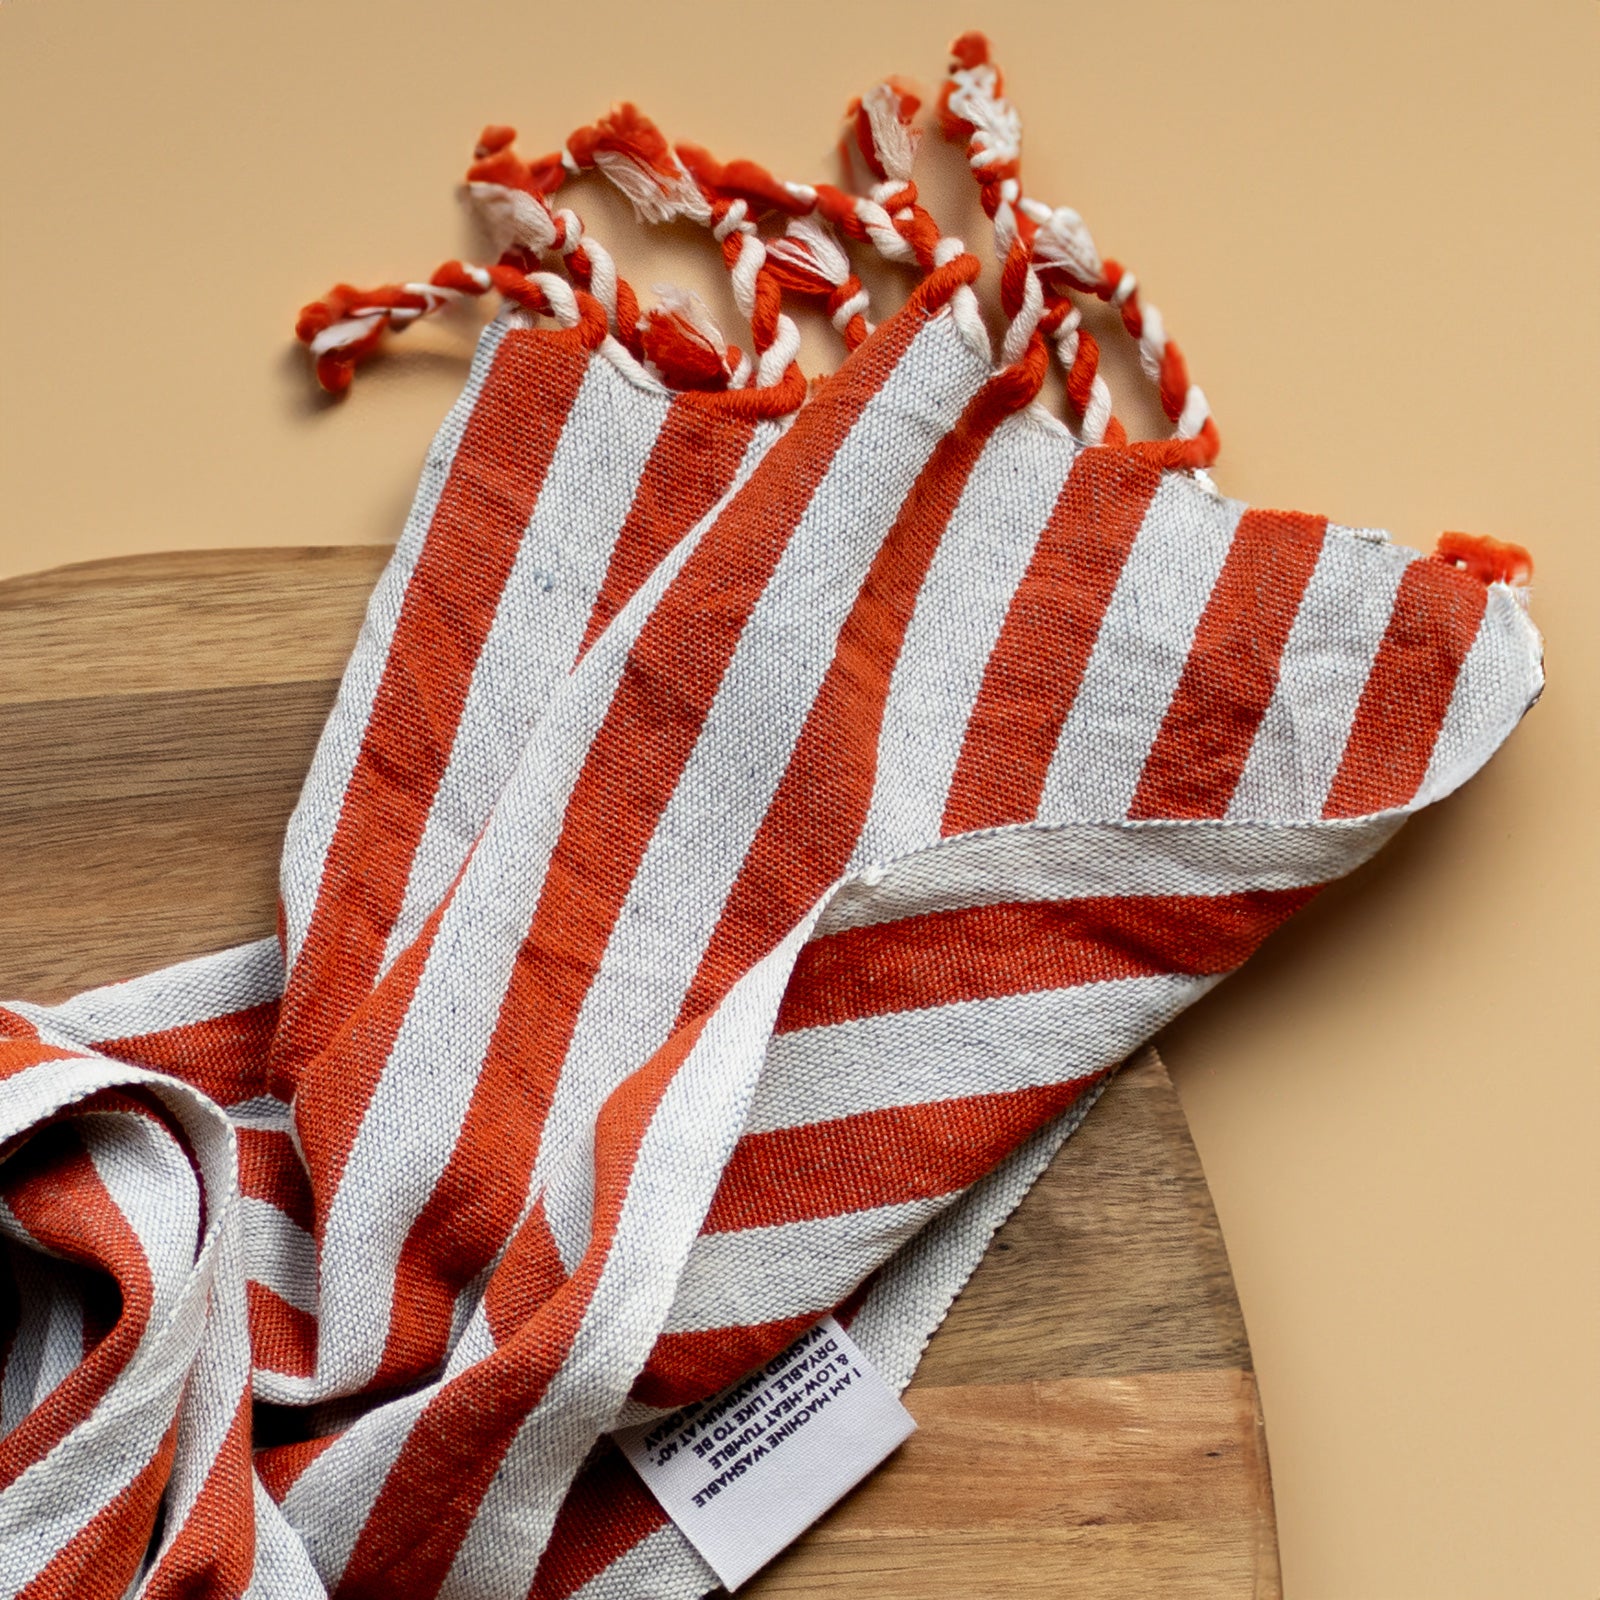 Small Handwoven Hand Towel - Red Stripes